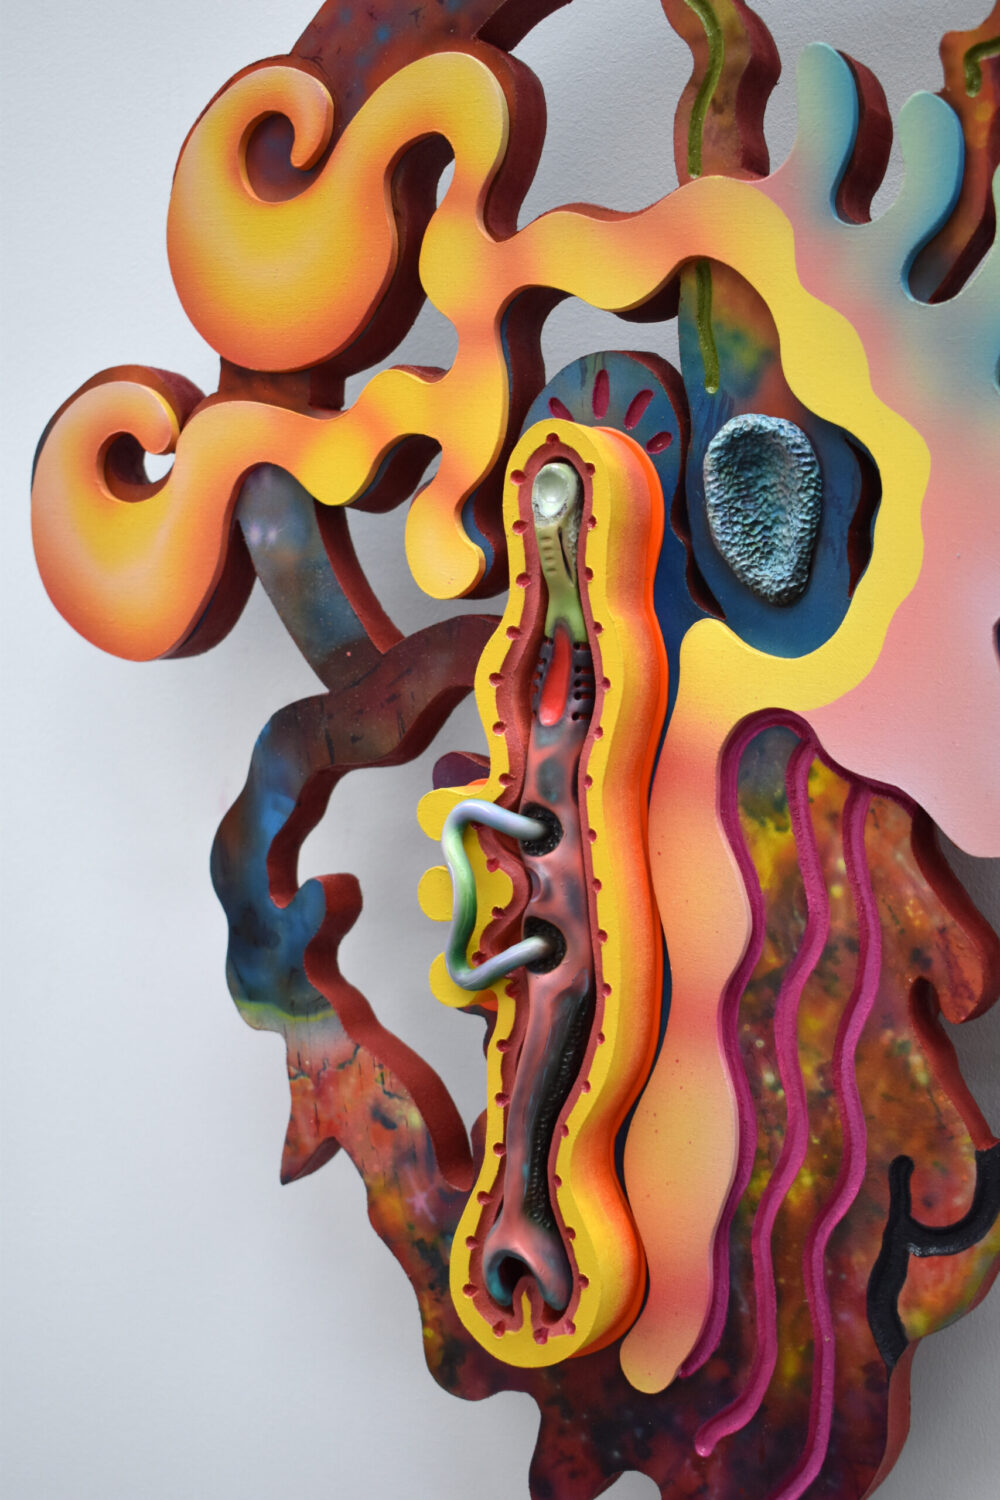 Up level hallucination (detail) Paddy Gould and Roxy Topia, 2022. Image provided by Bluecoat